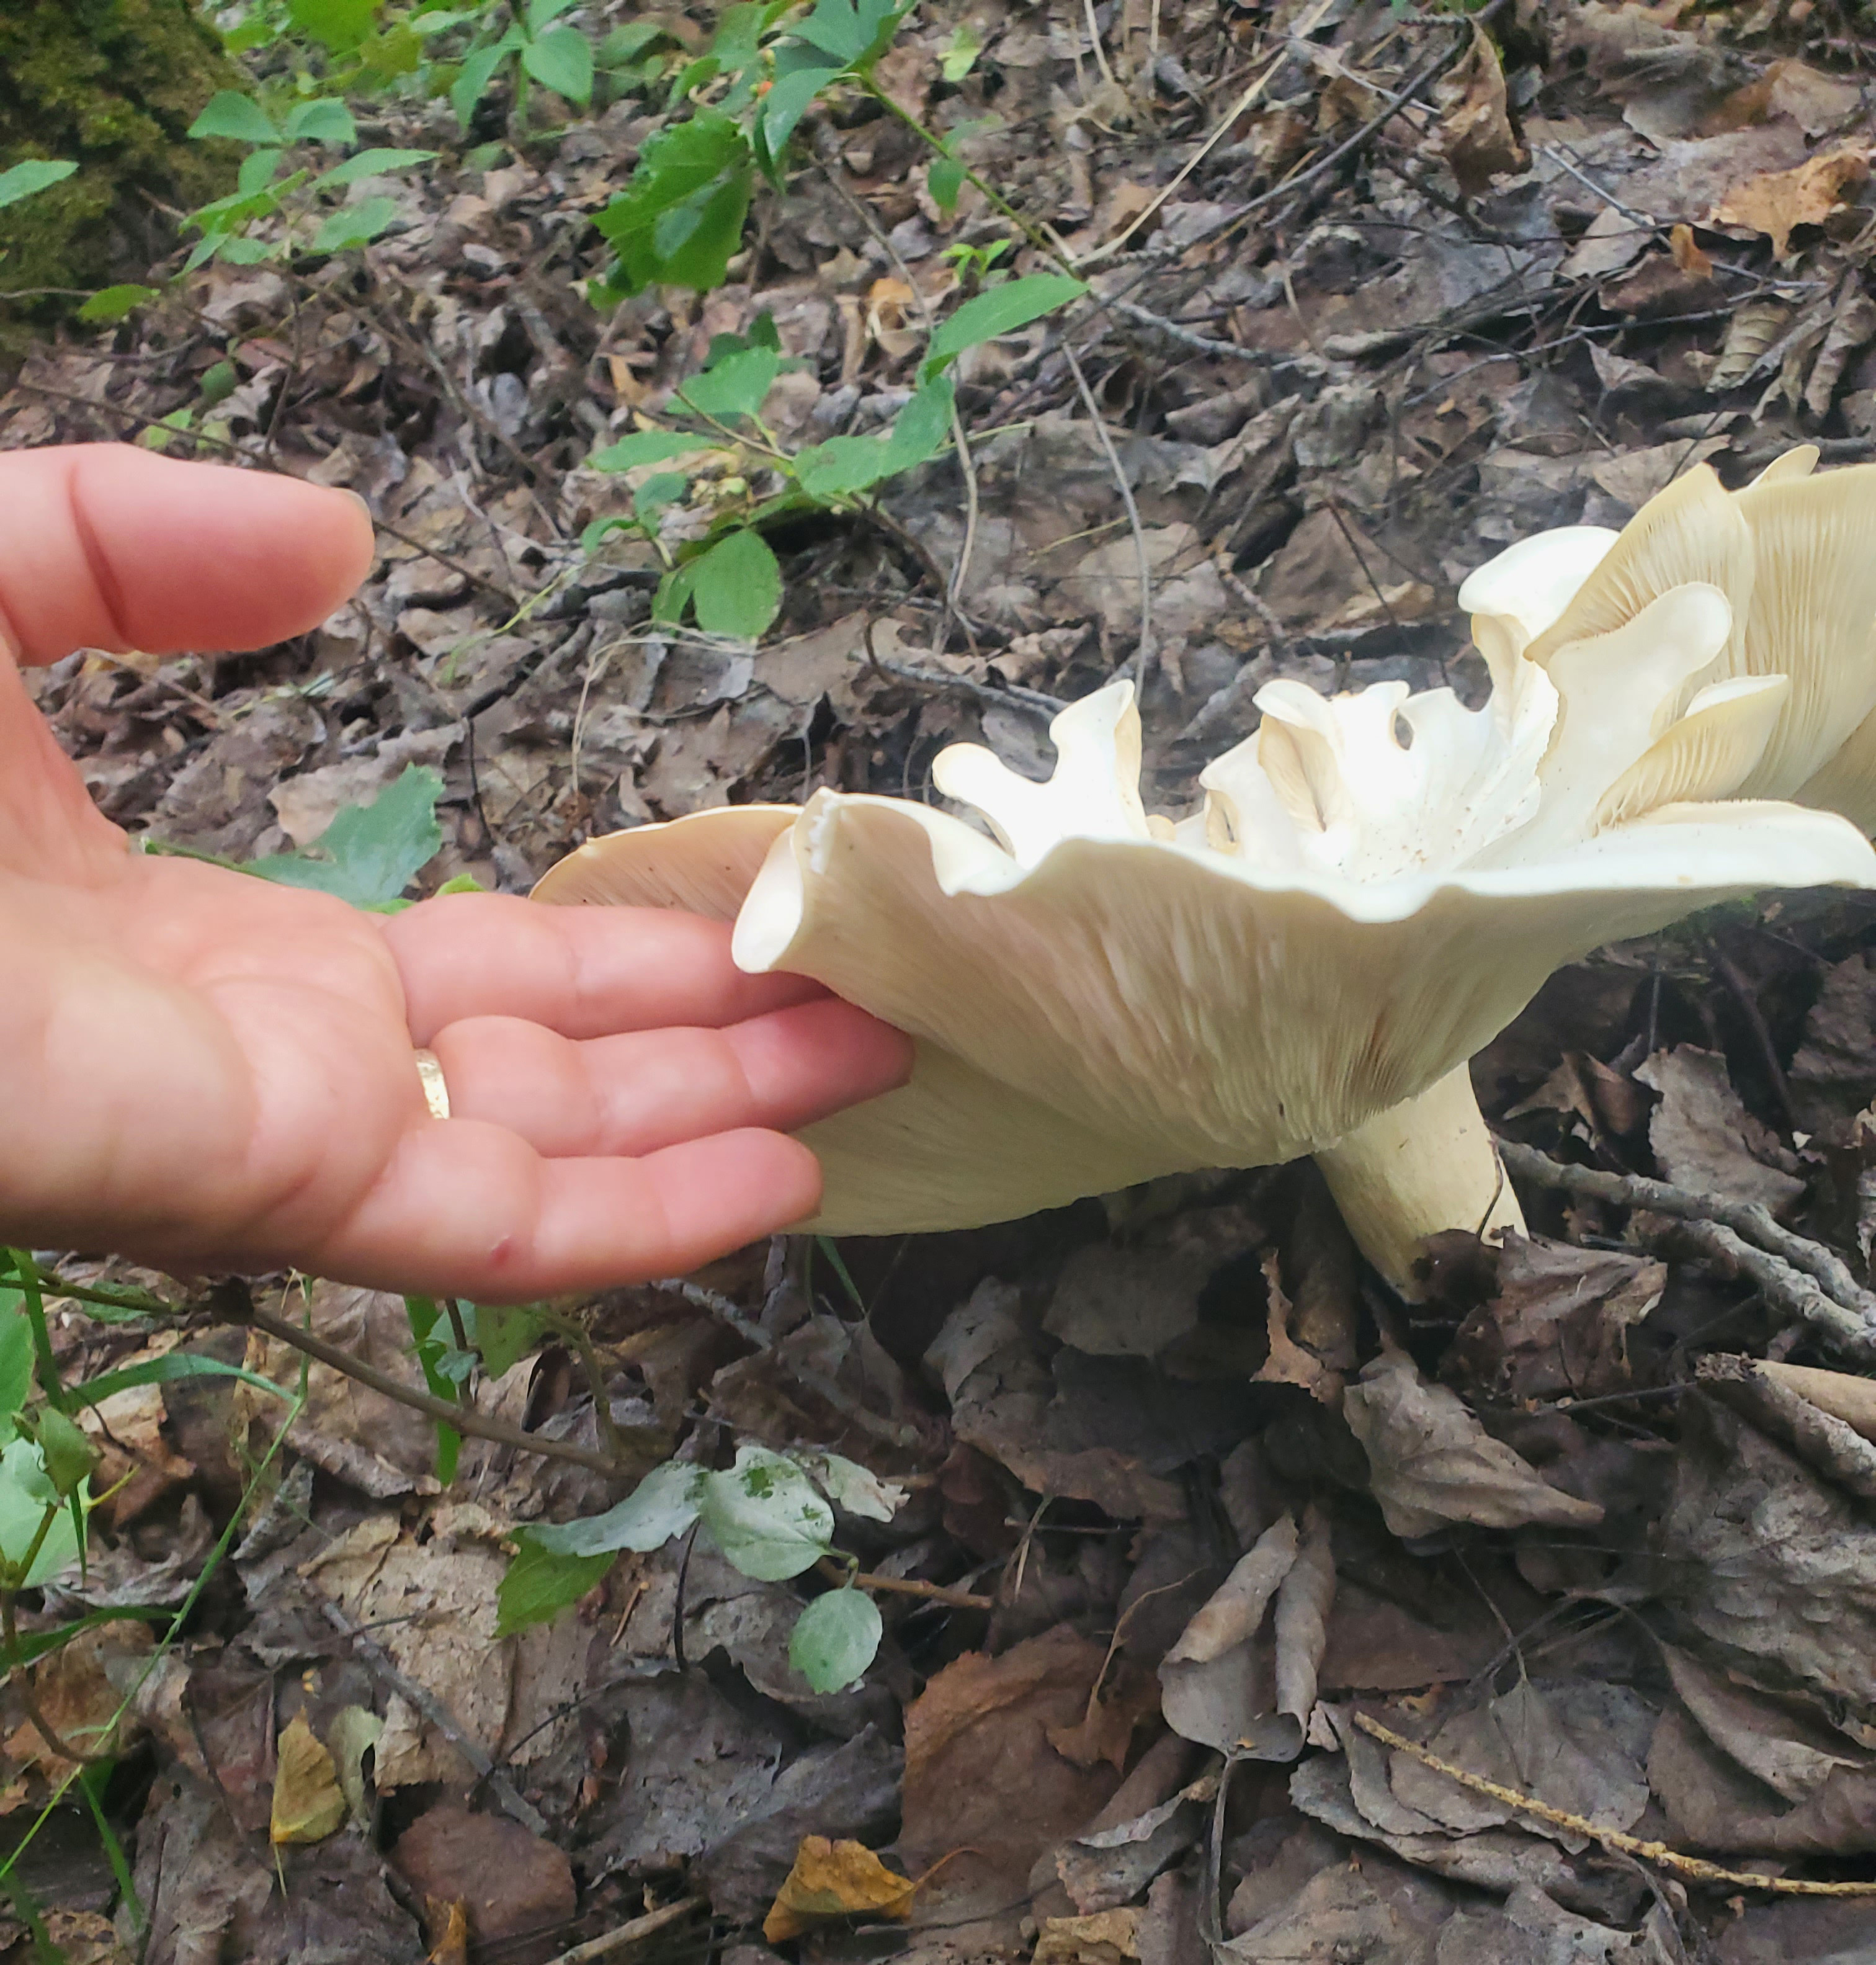 A person's hand gently touches the edge of a showy white mushroom on ground covered with fallen leaves.